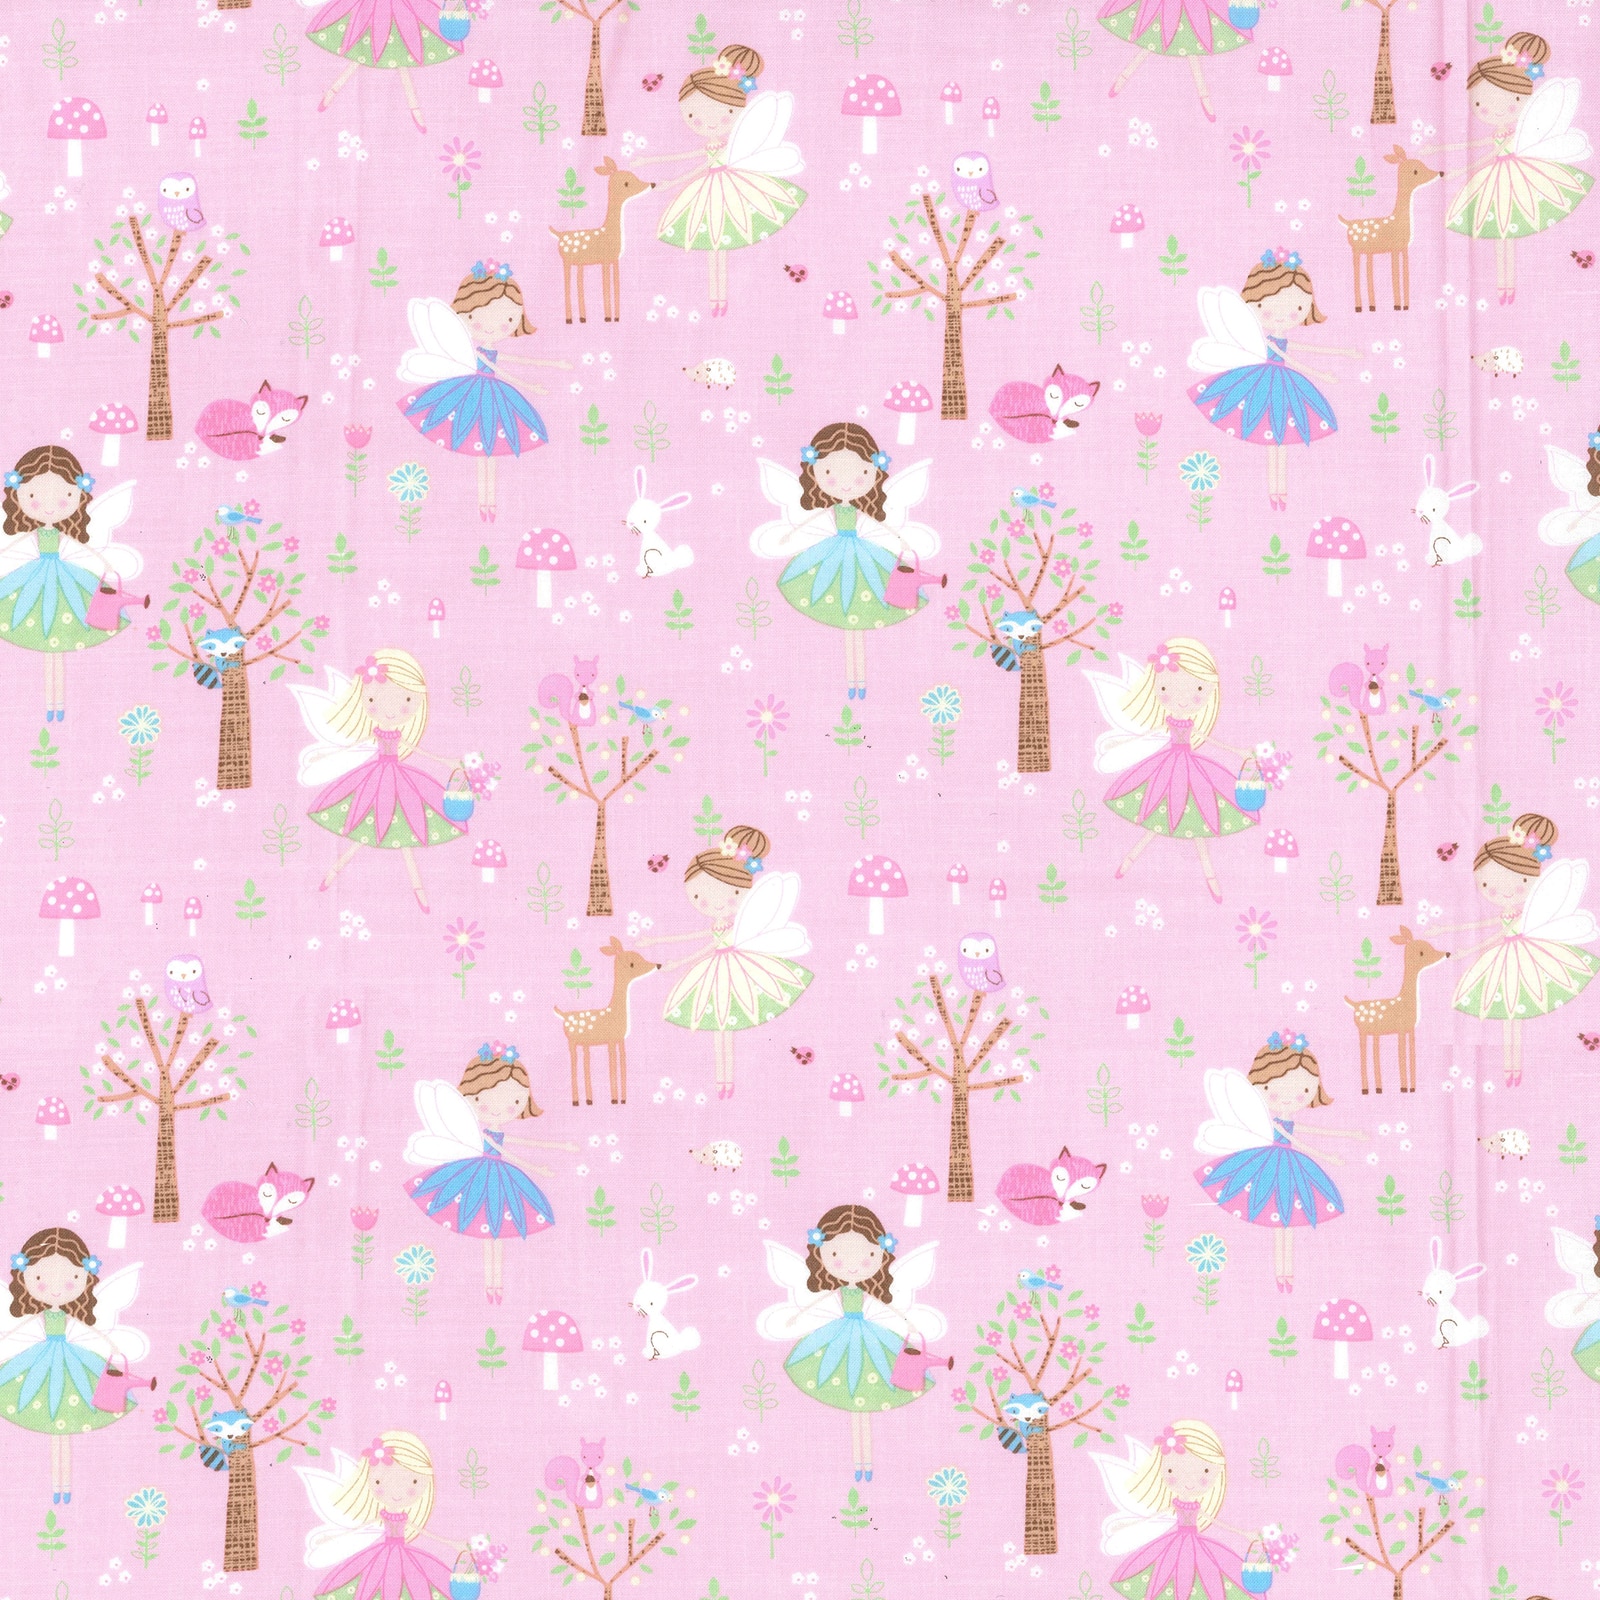 Fabric Traditions Fairies on Pink Cotton Fabric